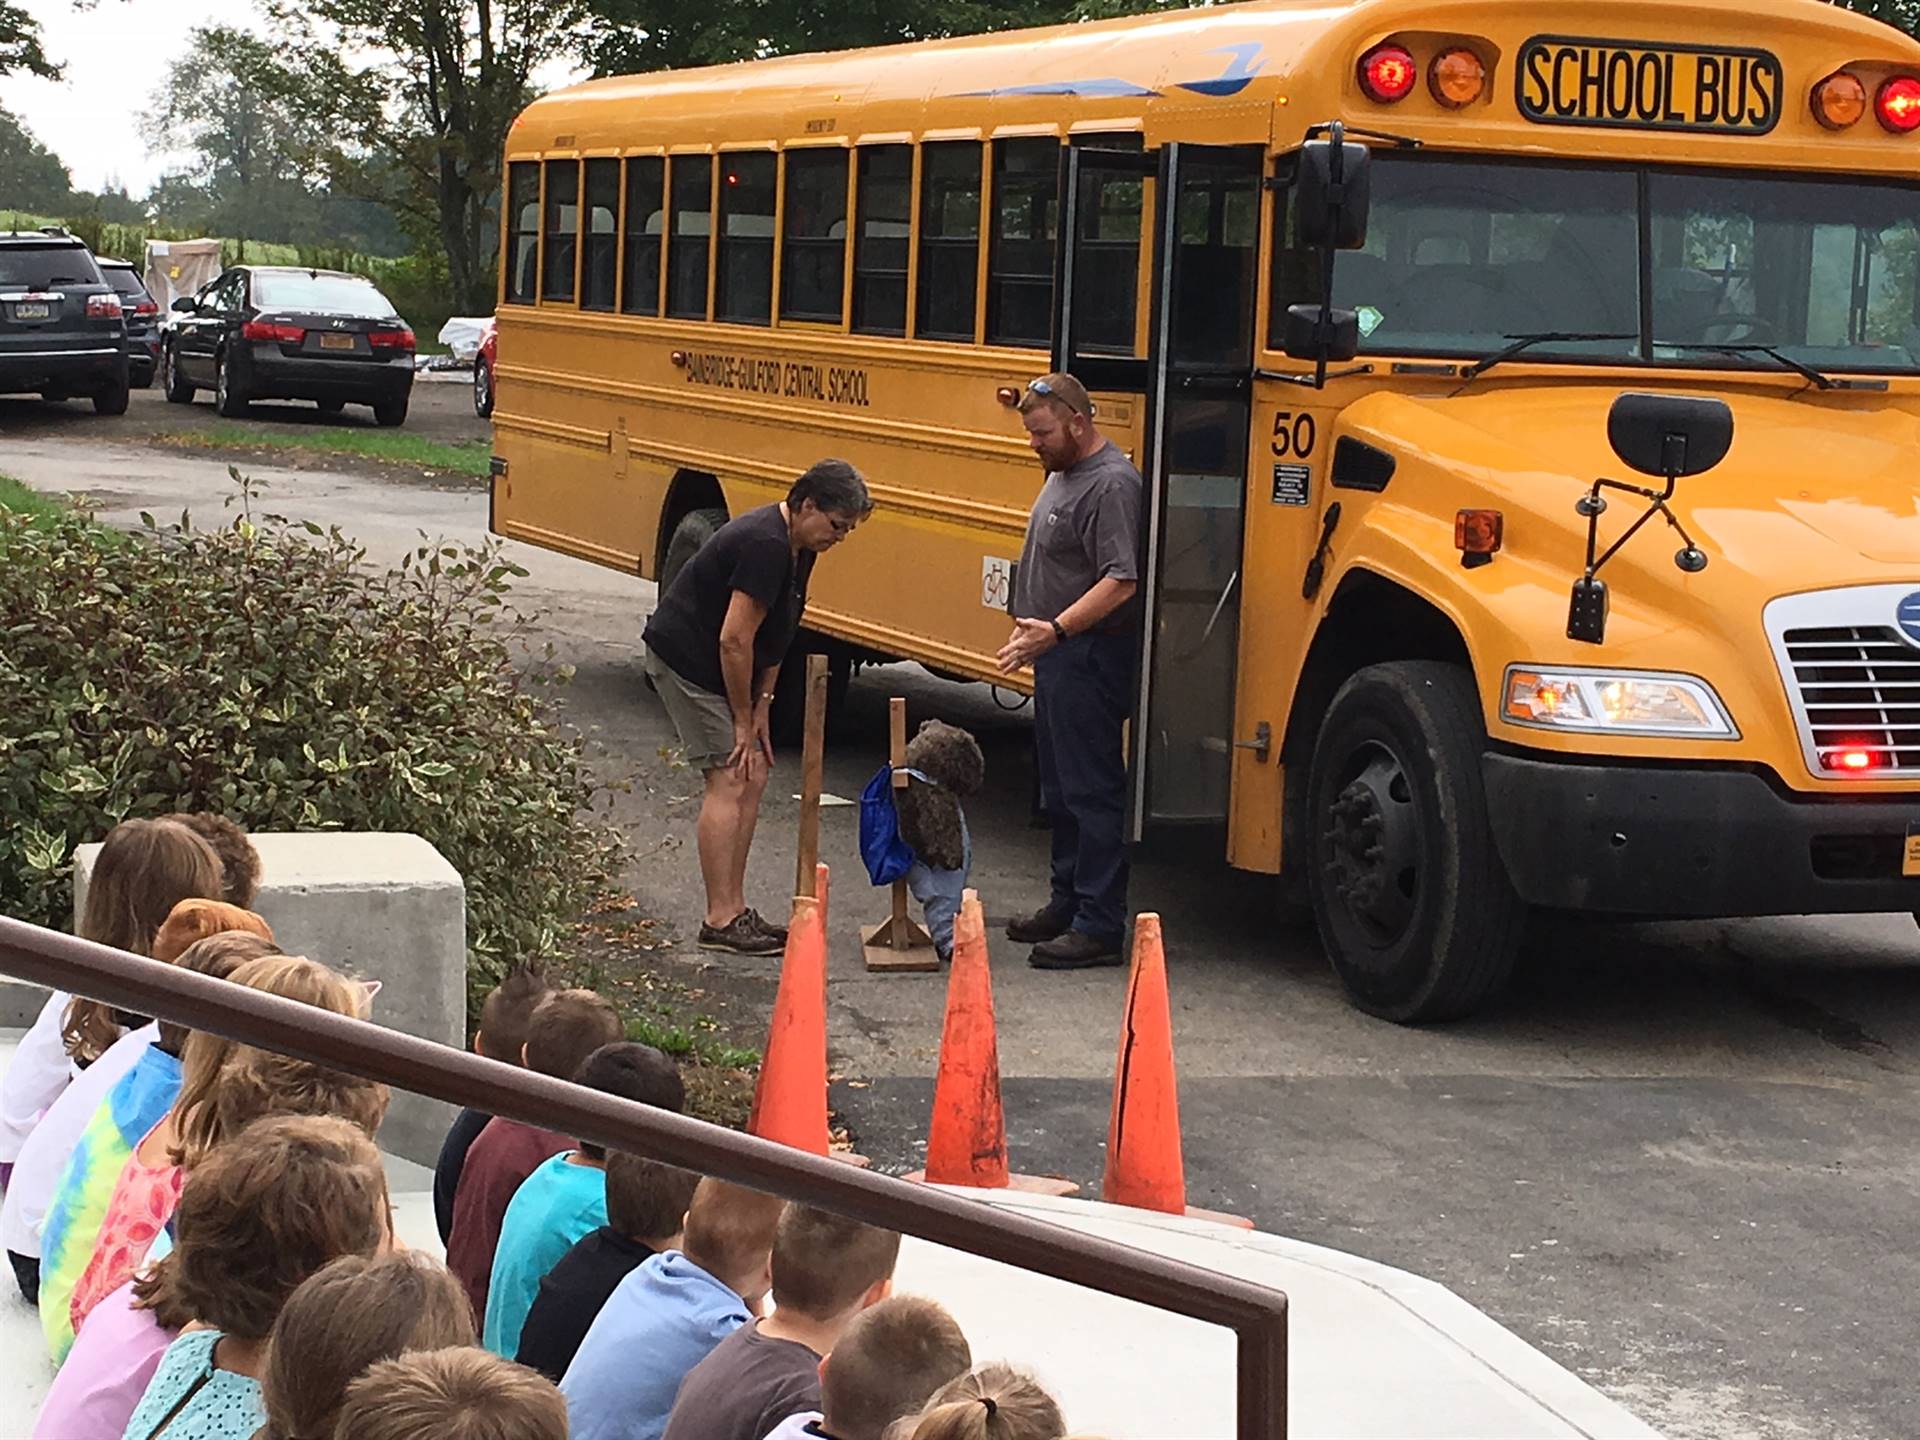 Bus driver shows student how to get on bus.